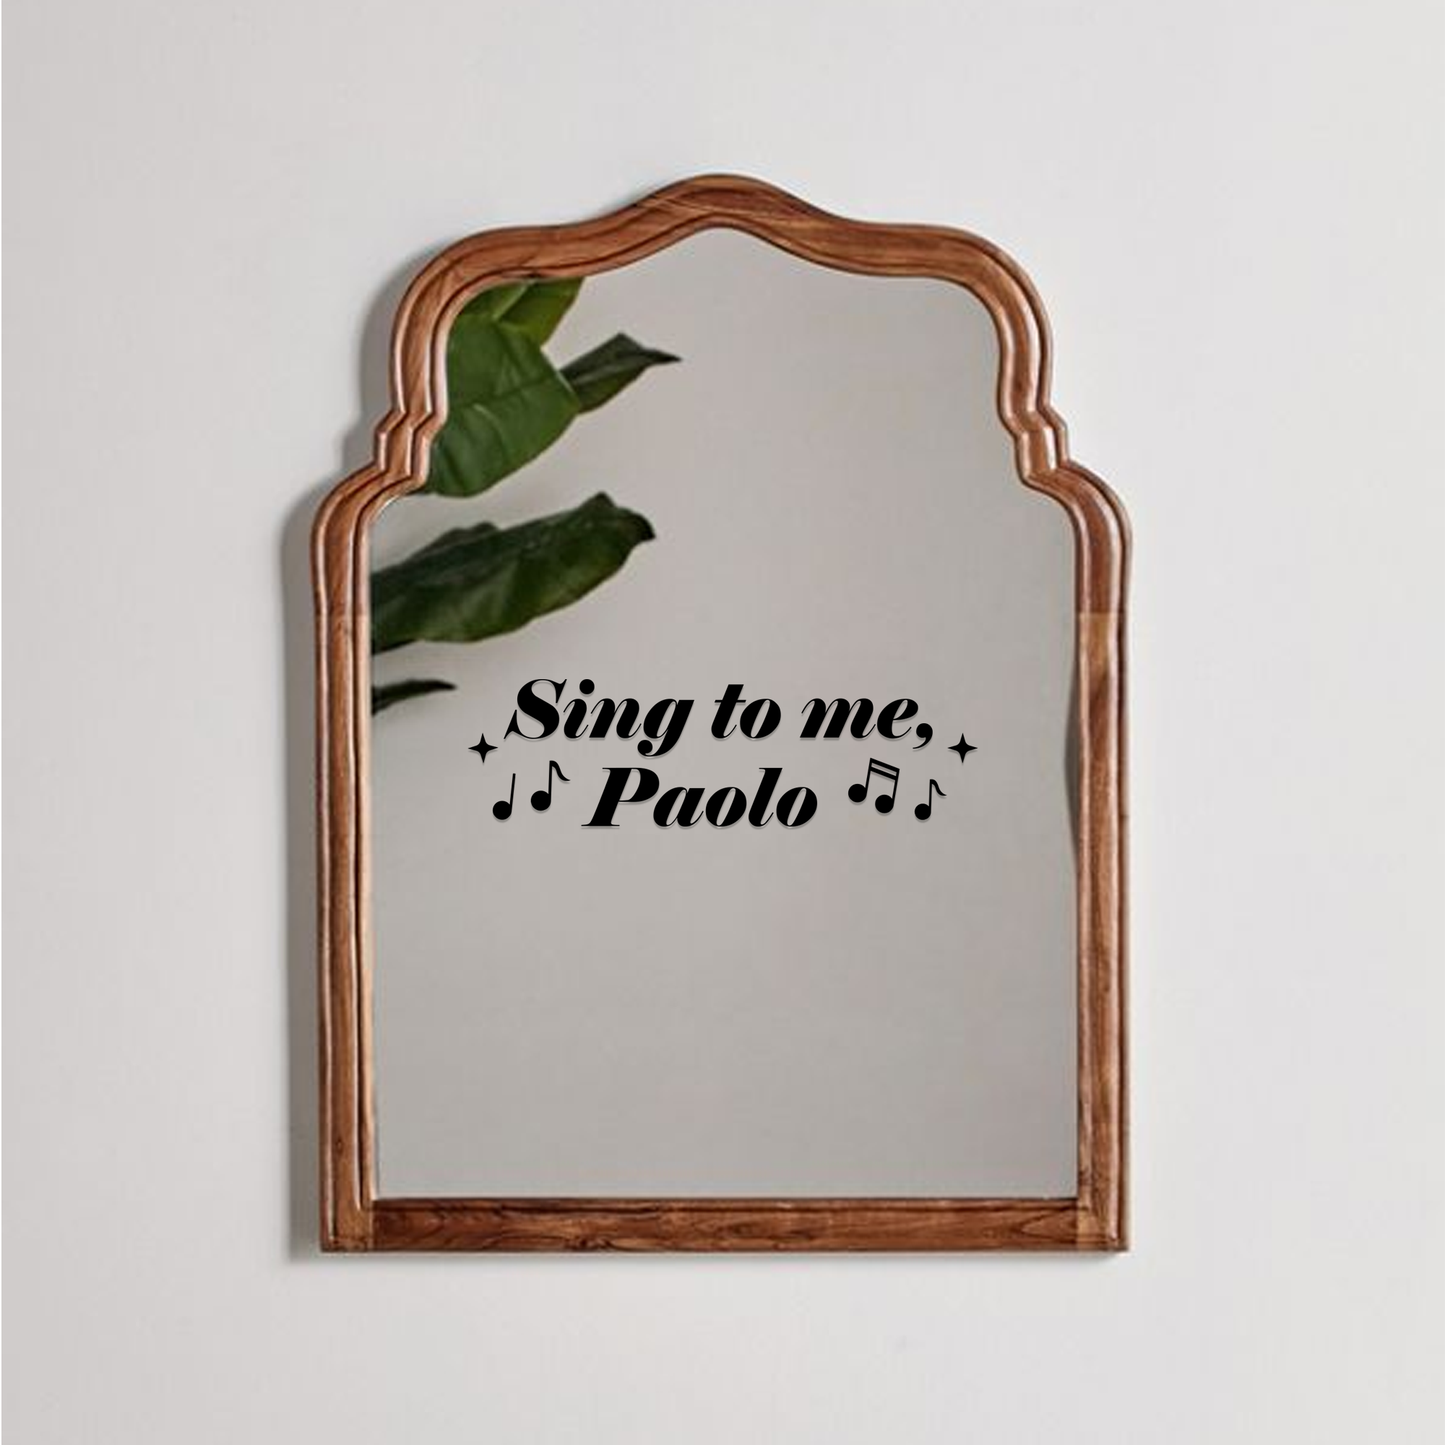 SING TO ME, PAOLO VINYL DECAL